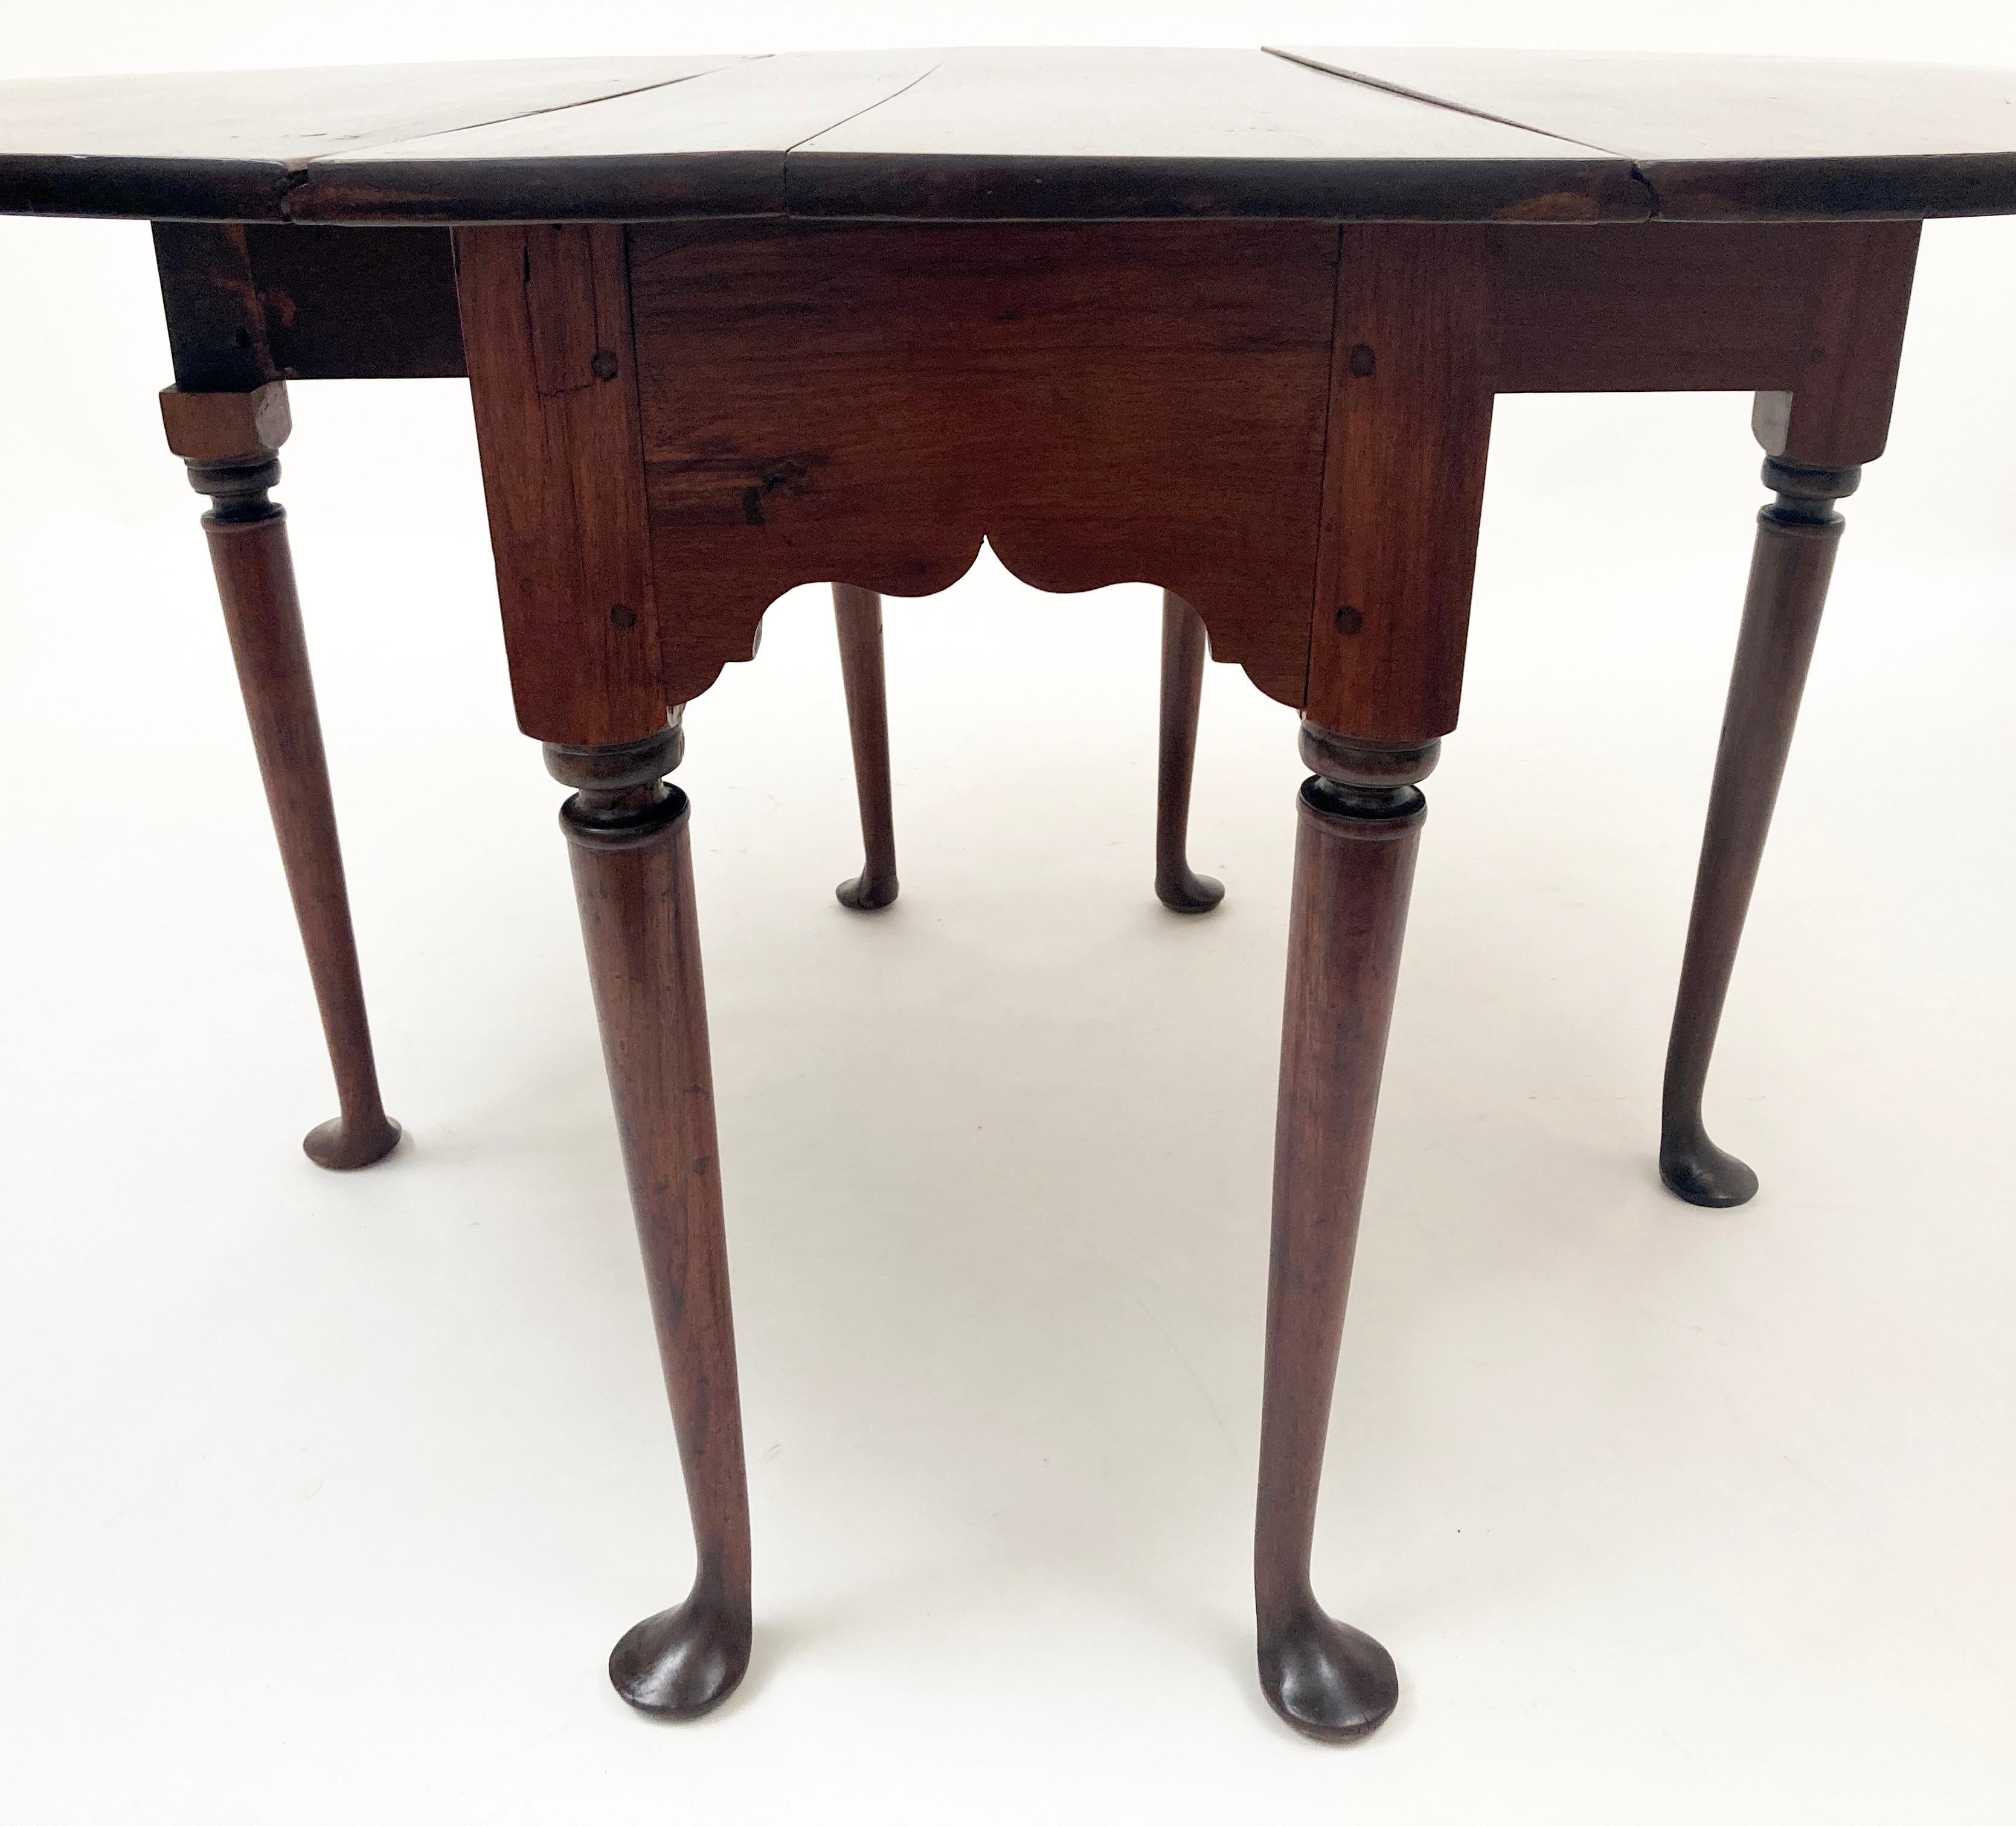 This amazing Kentucky mahogany table was hand made in the mid 1700's. Every element of this table was done by hand via carving, plane or forging. It's construction showcases wooden pegs, square nails and large hand-forged spikes to hinge the